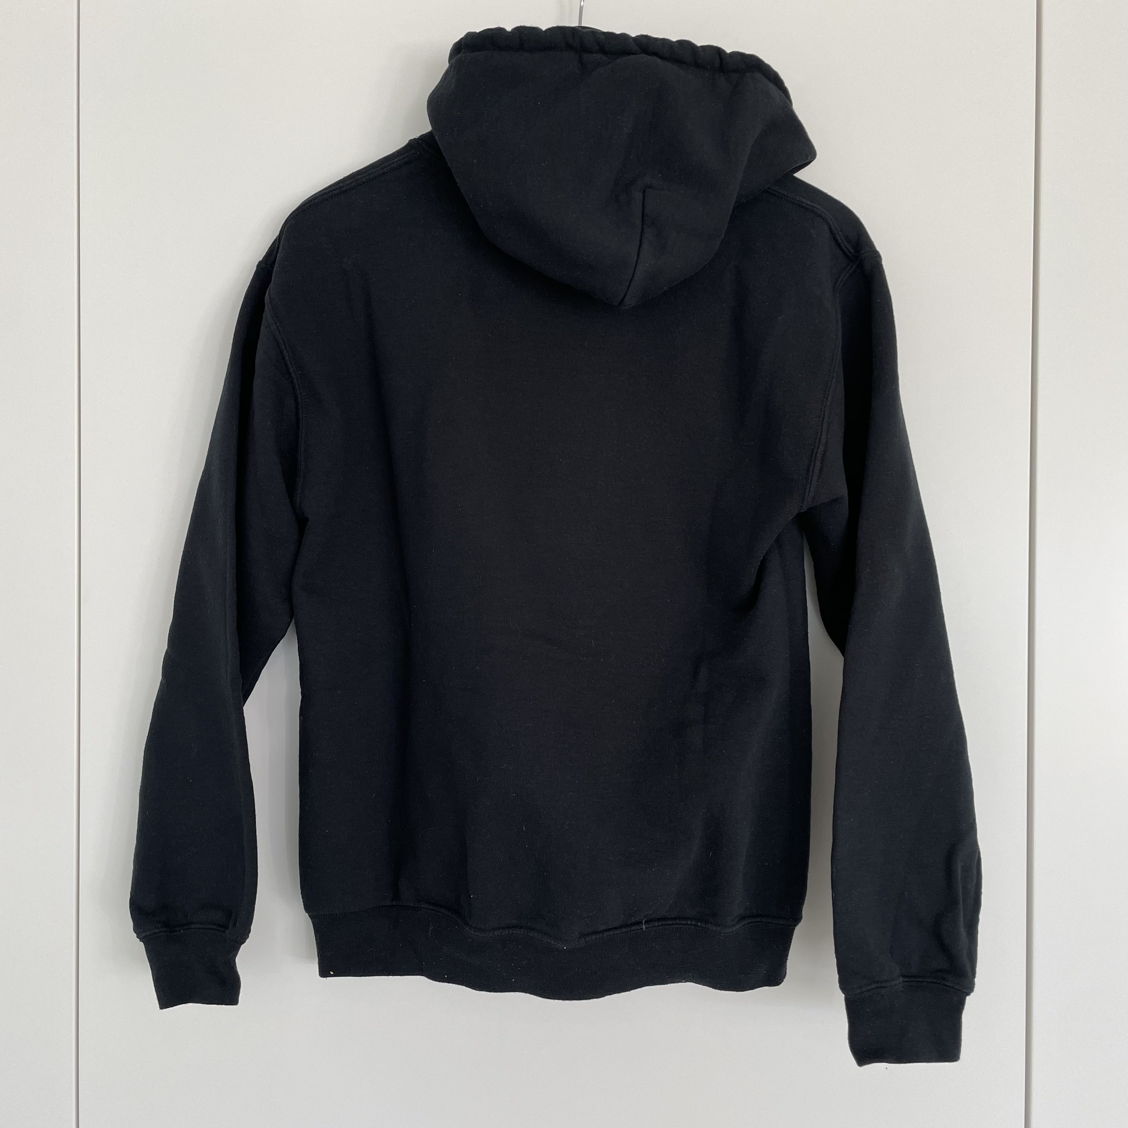 'The Classy Issue' Hoodie Size S